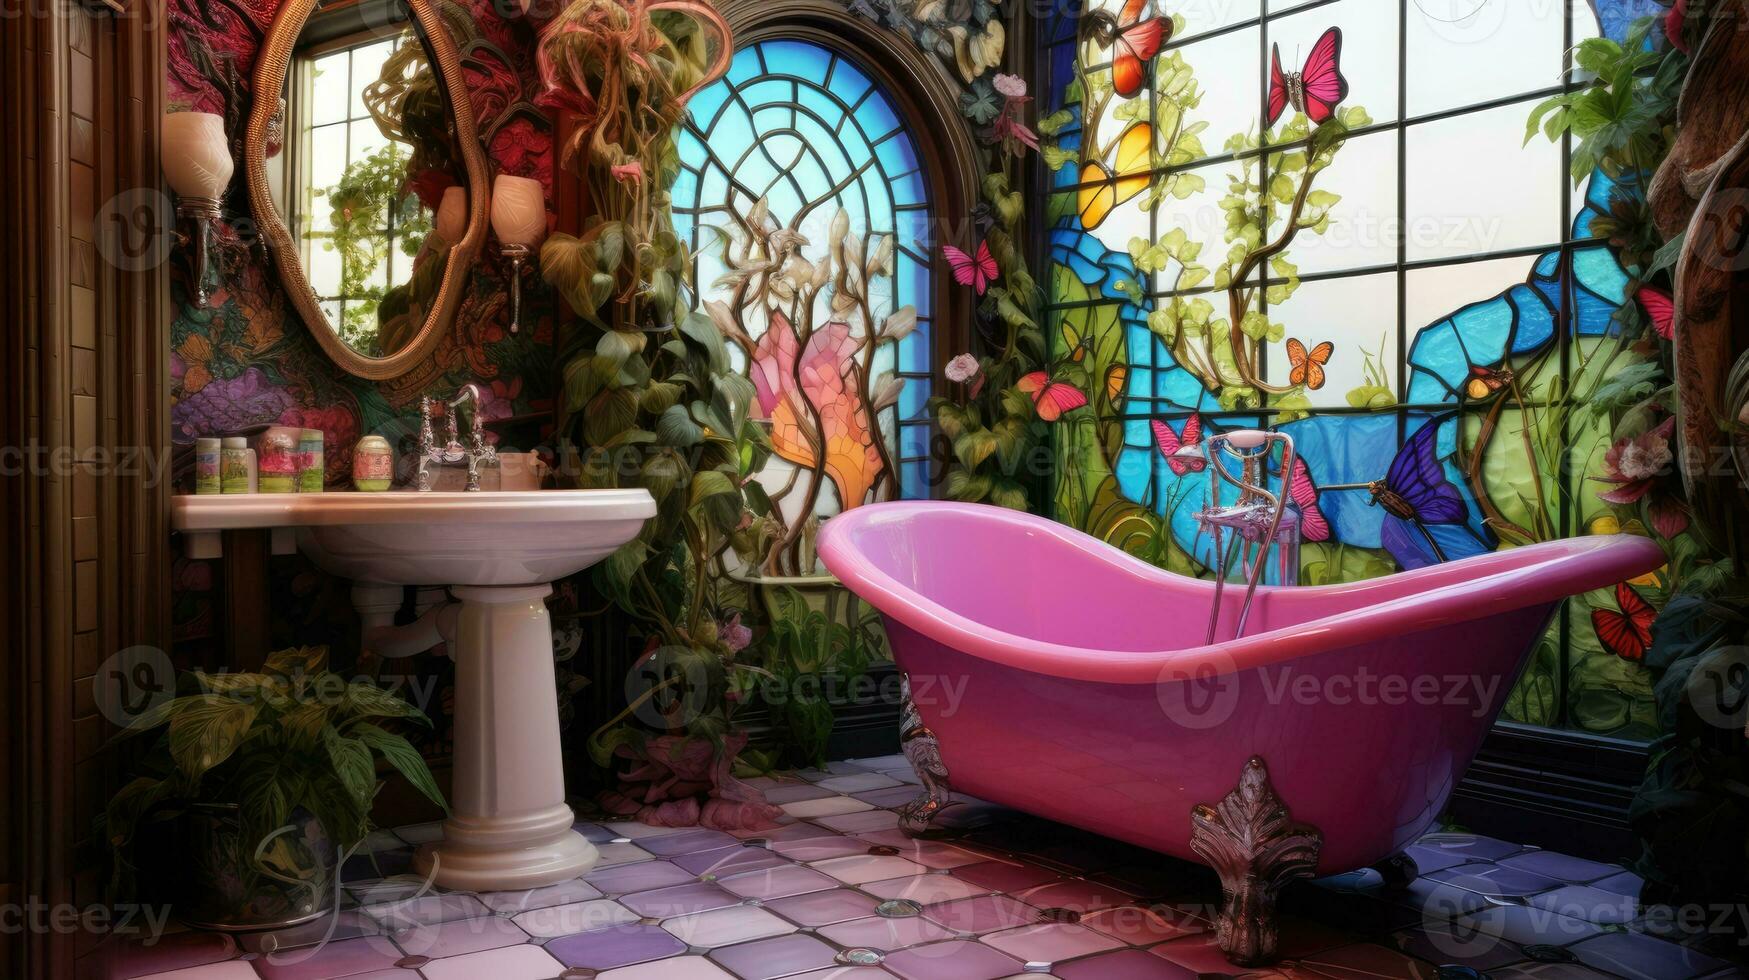 Bathroom in kitsch style. Incredible fairytale design and vibrant colors. photo